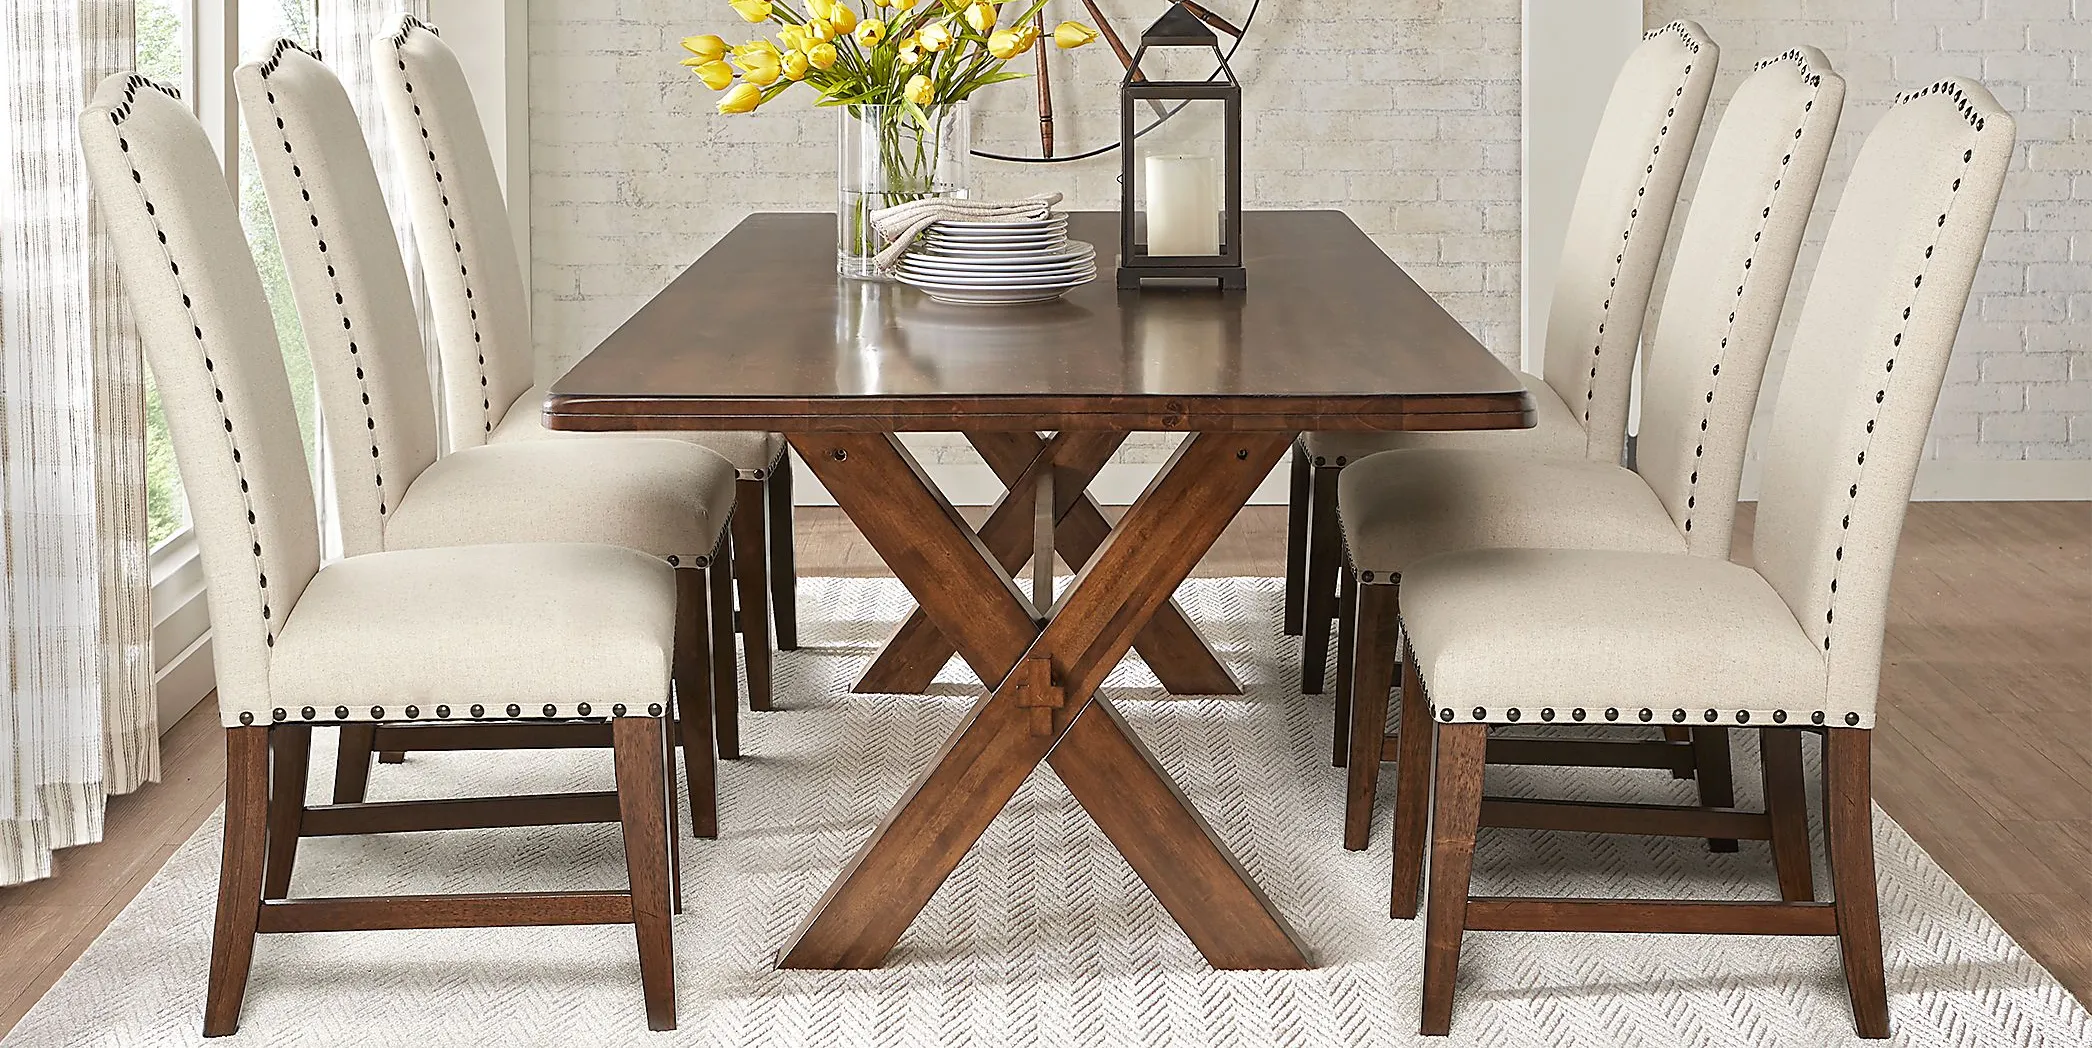 Twin Lakes Brown 5 Pc 84 in. Rectangle Dining Room